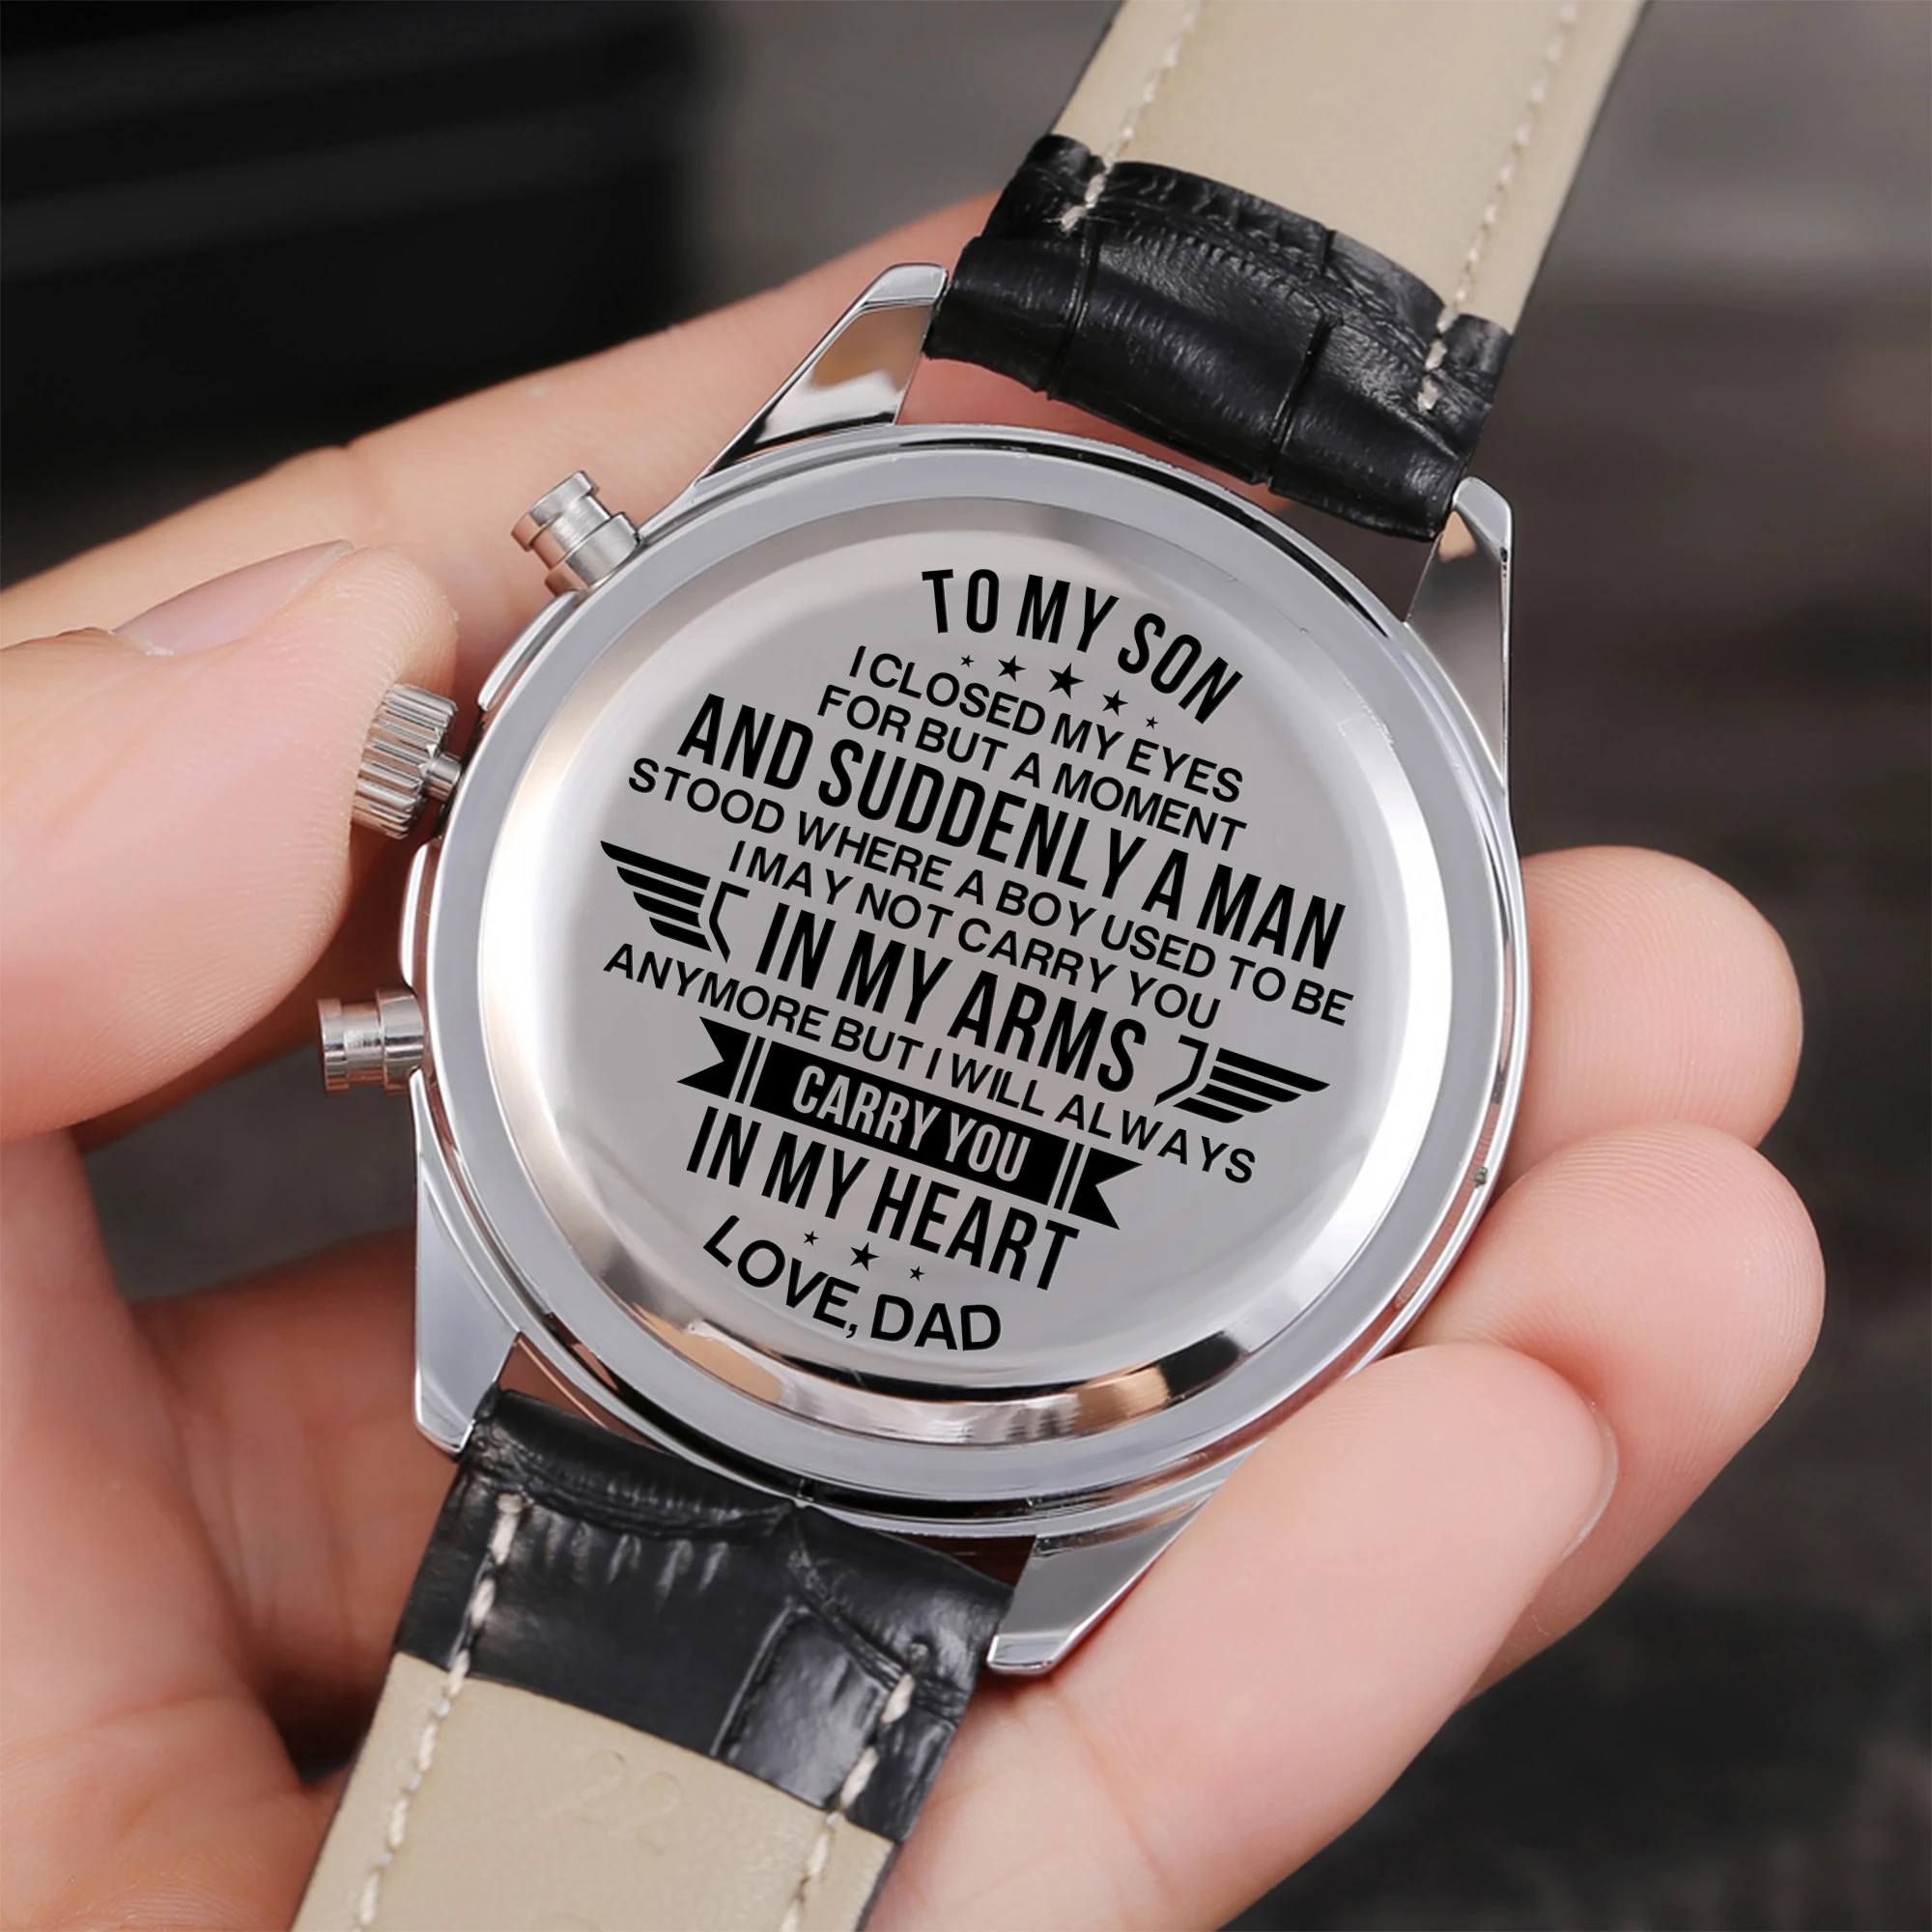 

"Dad TO SON ENGRAVED Luxury sports belt waterproof watch I PRAY YOU'LL ALWAYS BE SAFE "